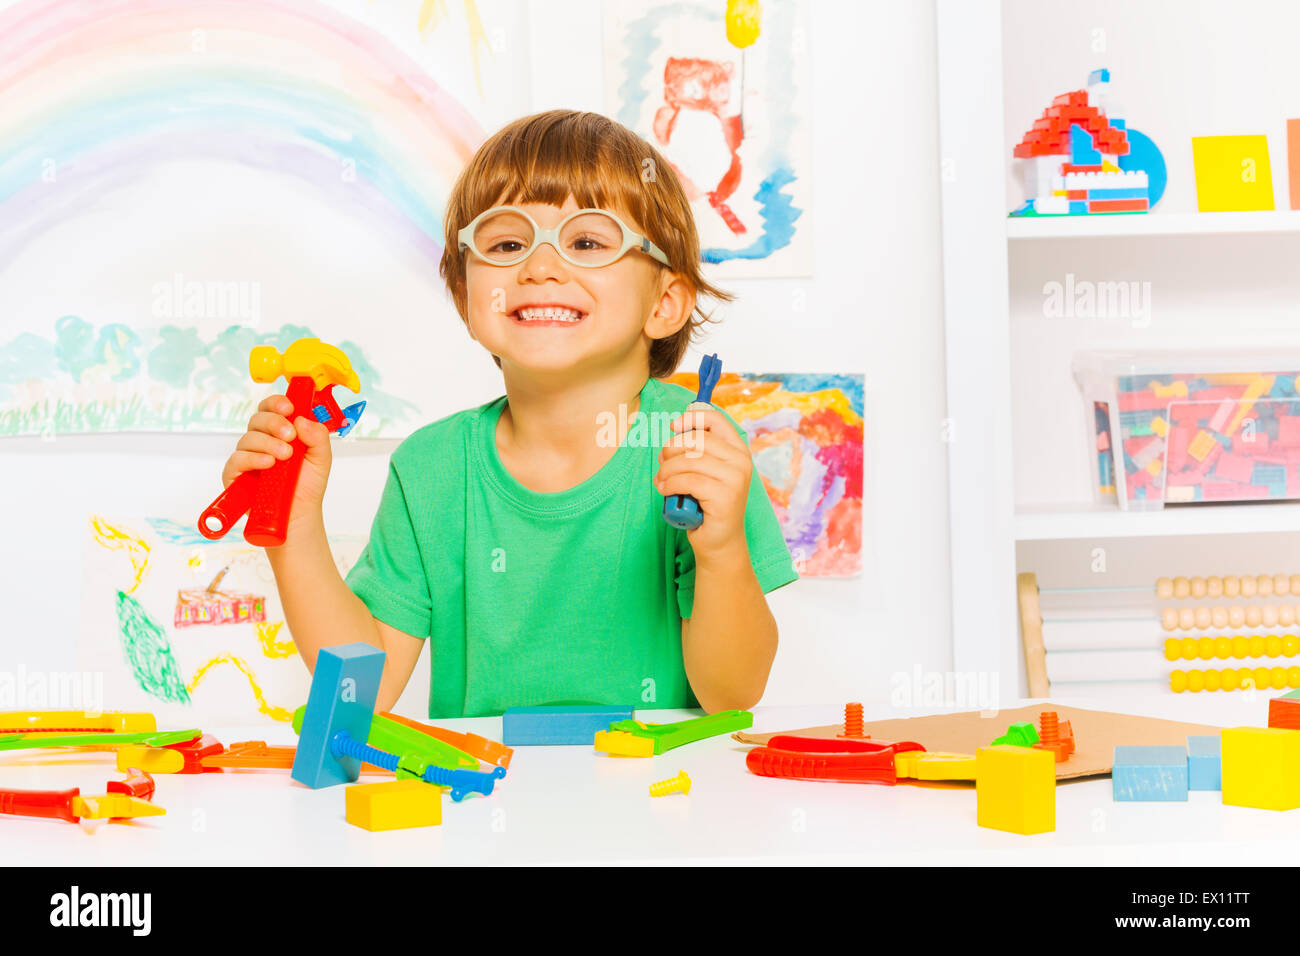 Smart boy in glasses with toy work tools Stock Photo